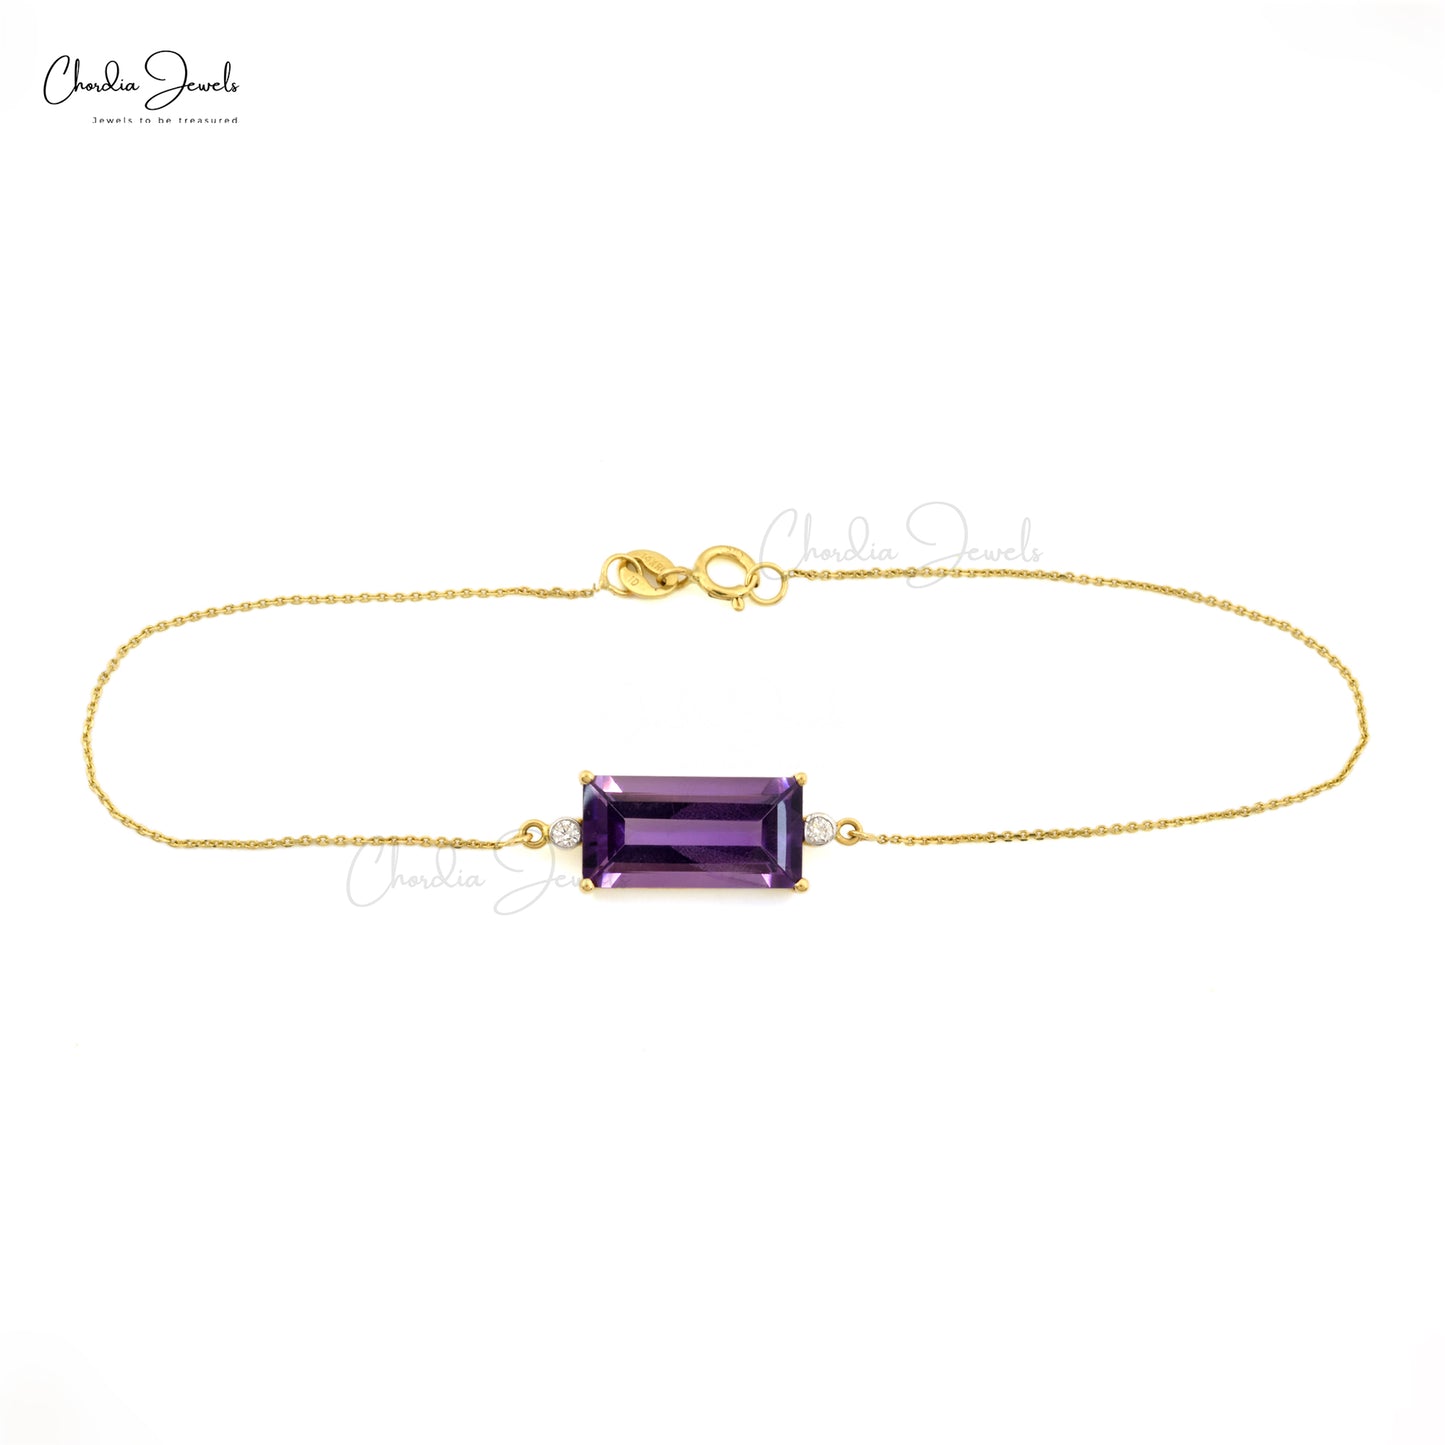 Genuine Amethyst and Diamond Accented Bracelet 14k Solid Yellow Gold Chain Bracelet For Women